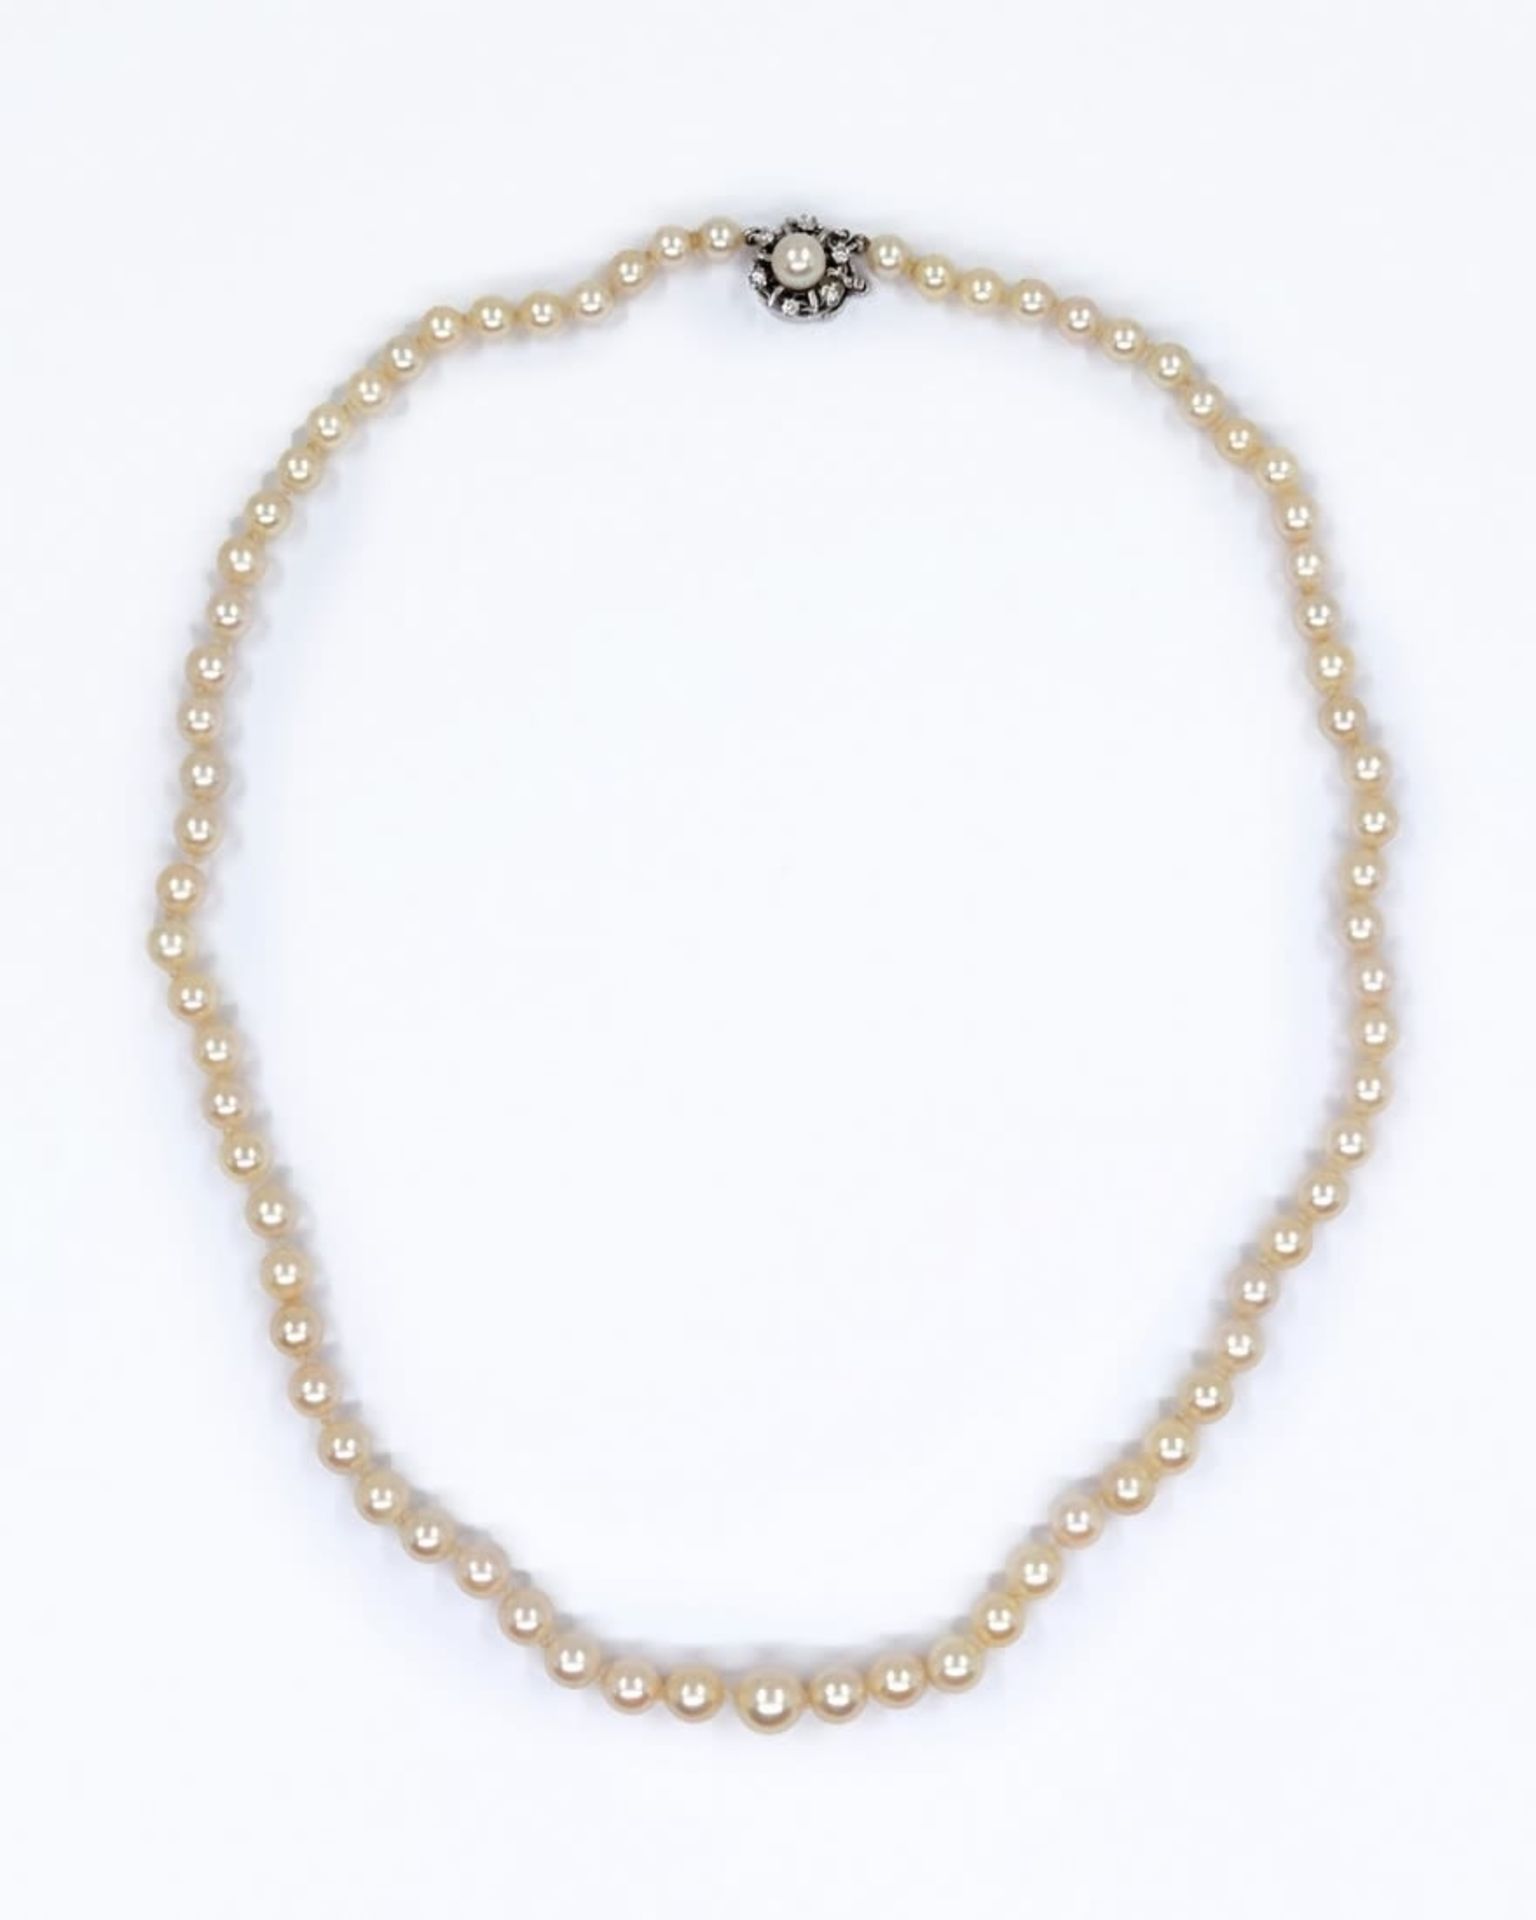 An antique pearl necklace from the 1920s, interwoven with sea pearls of different sizes, a bracket - Bild 3 aus 6